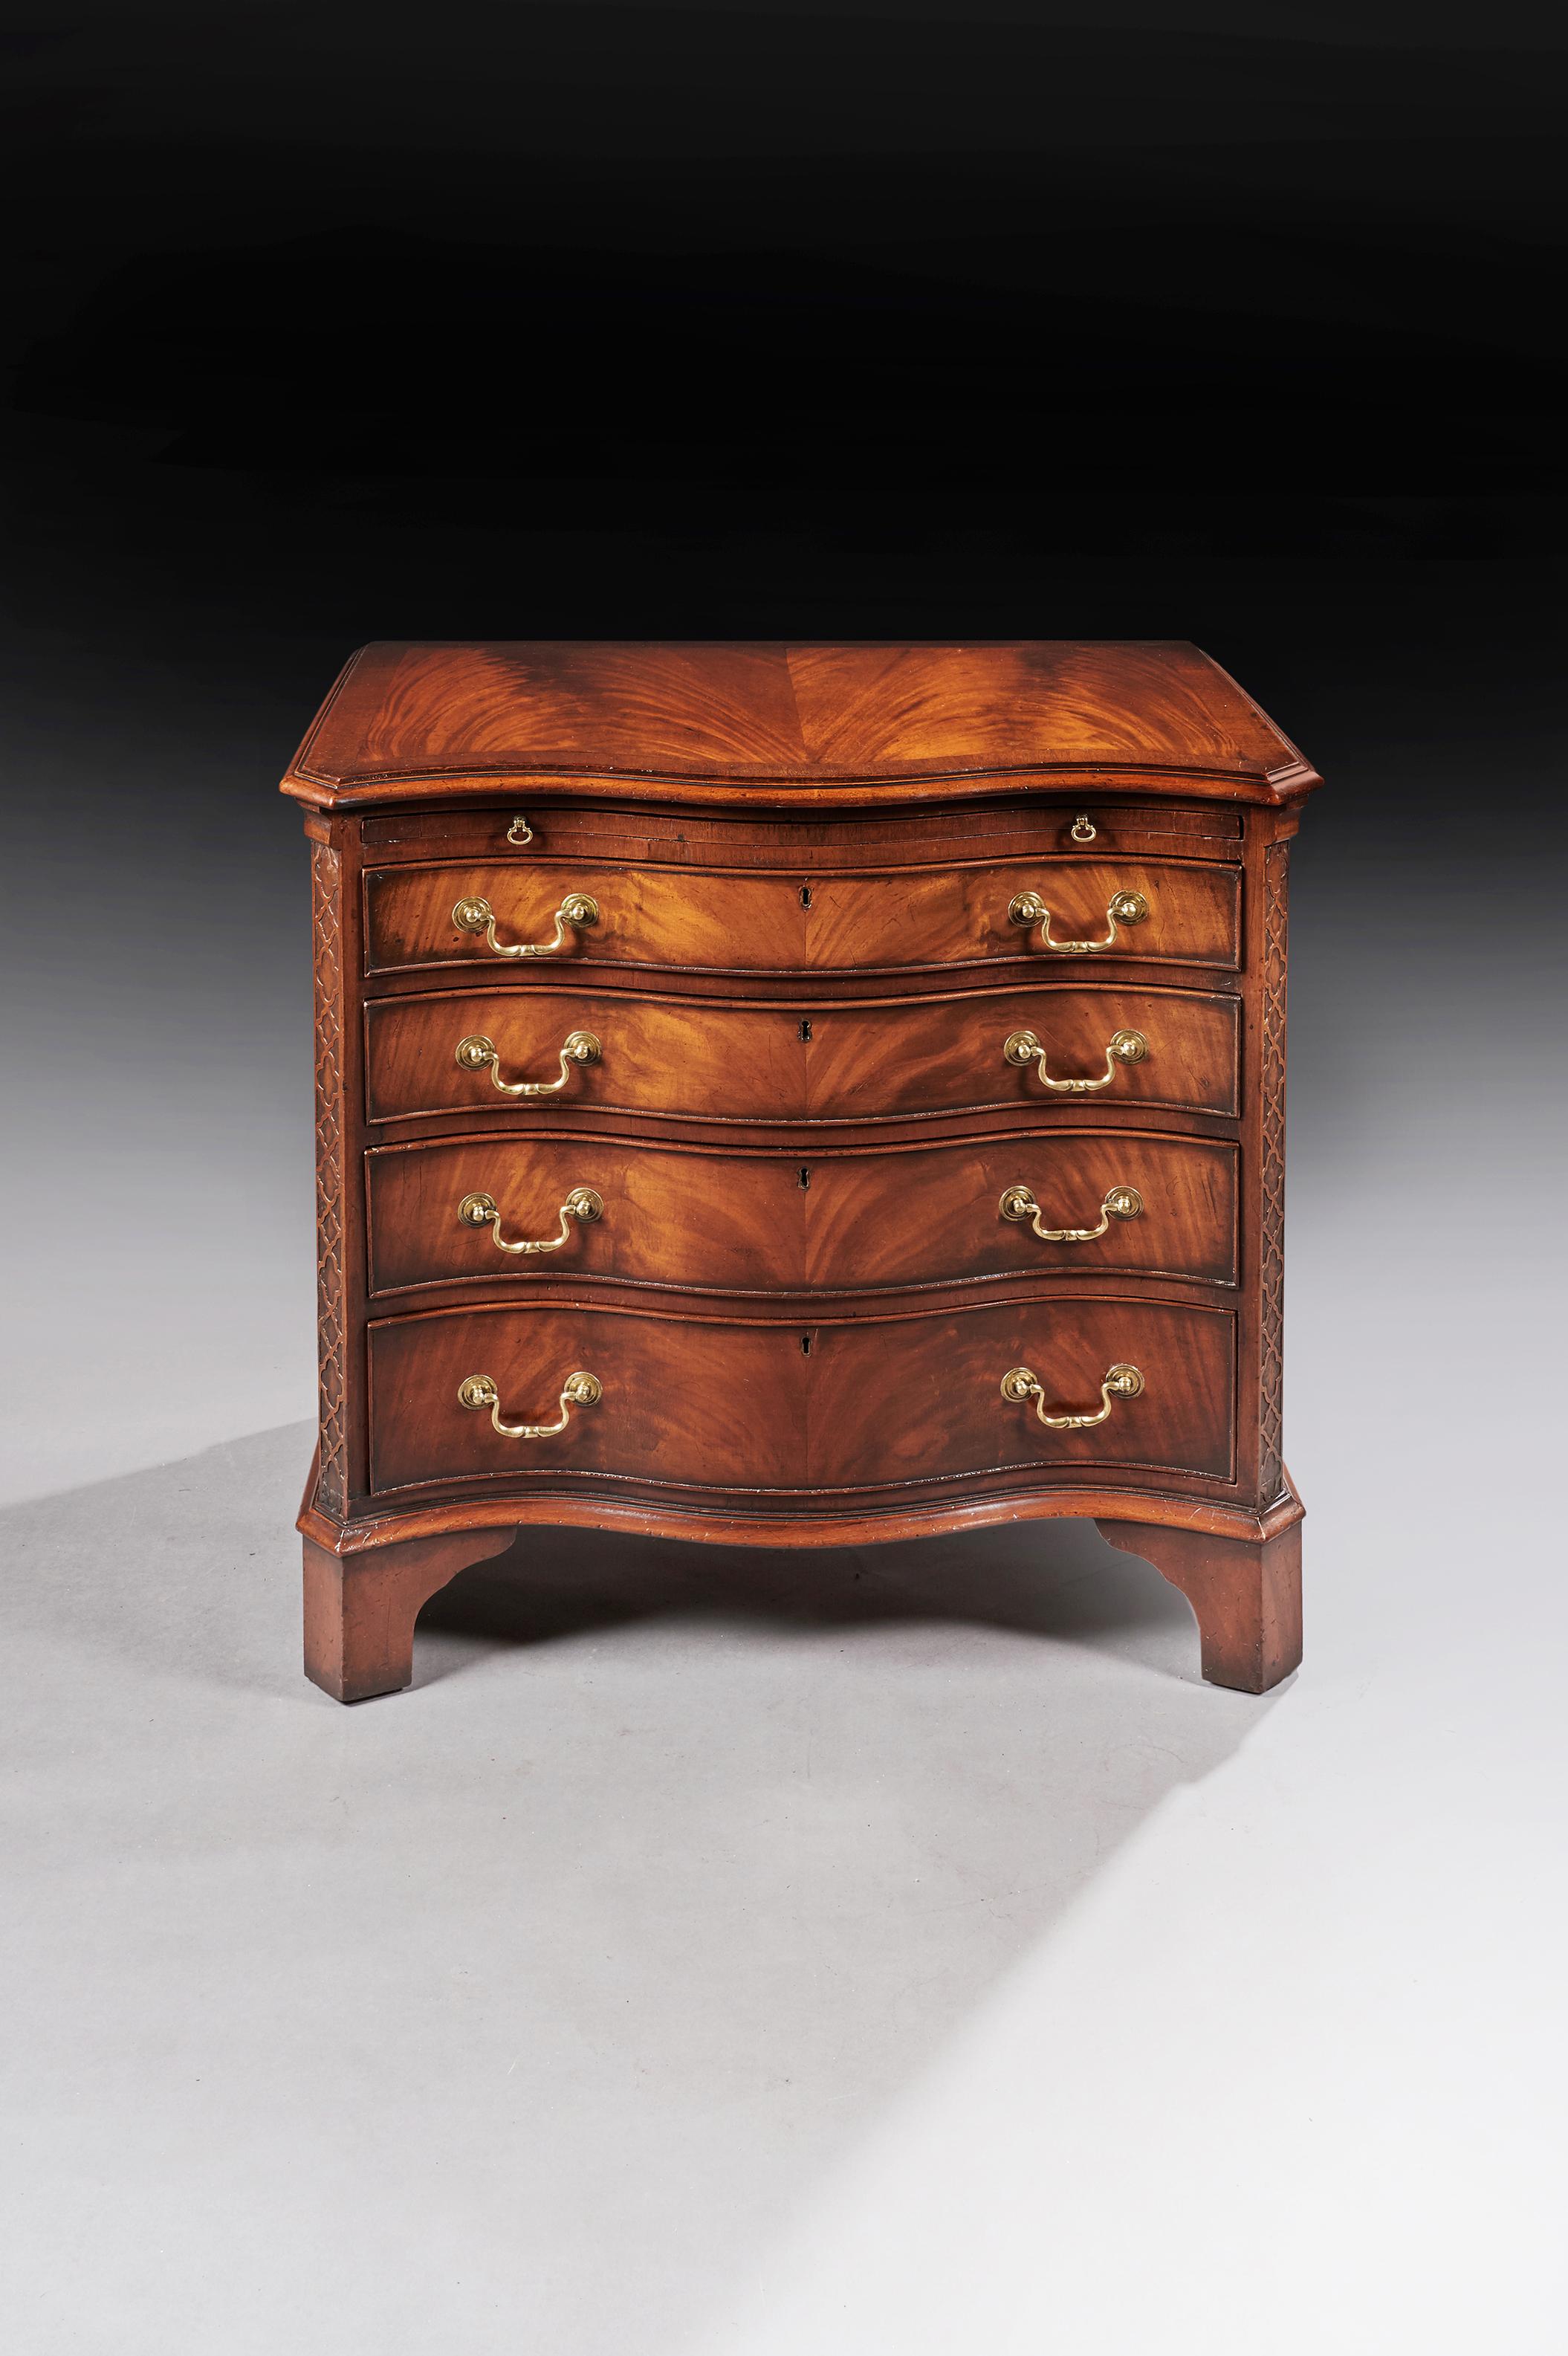 A very good quality antique serpentine mahogany chest of drawers of great color.

English circa 1900.

One of the best colored early 20th century chest of drawers we have had for sometime. 
Very well constructed, the serpentine book match